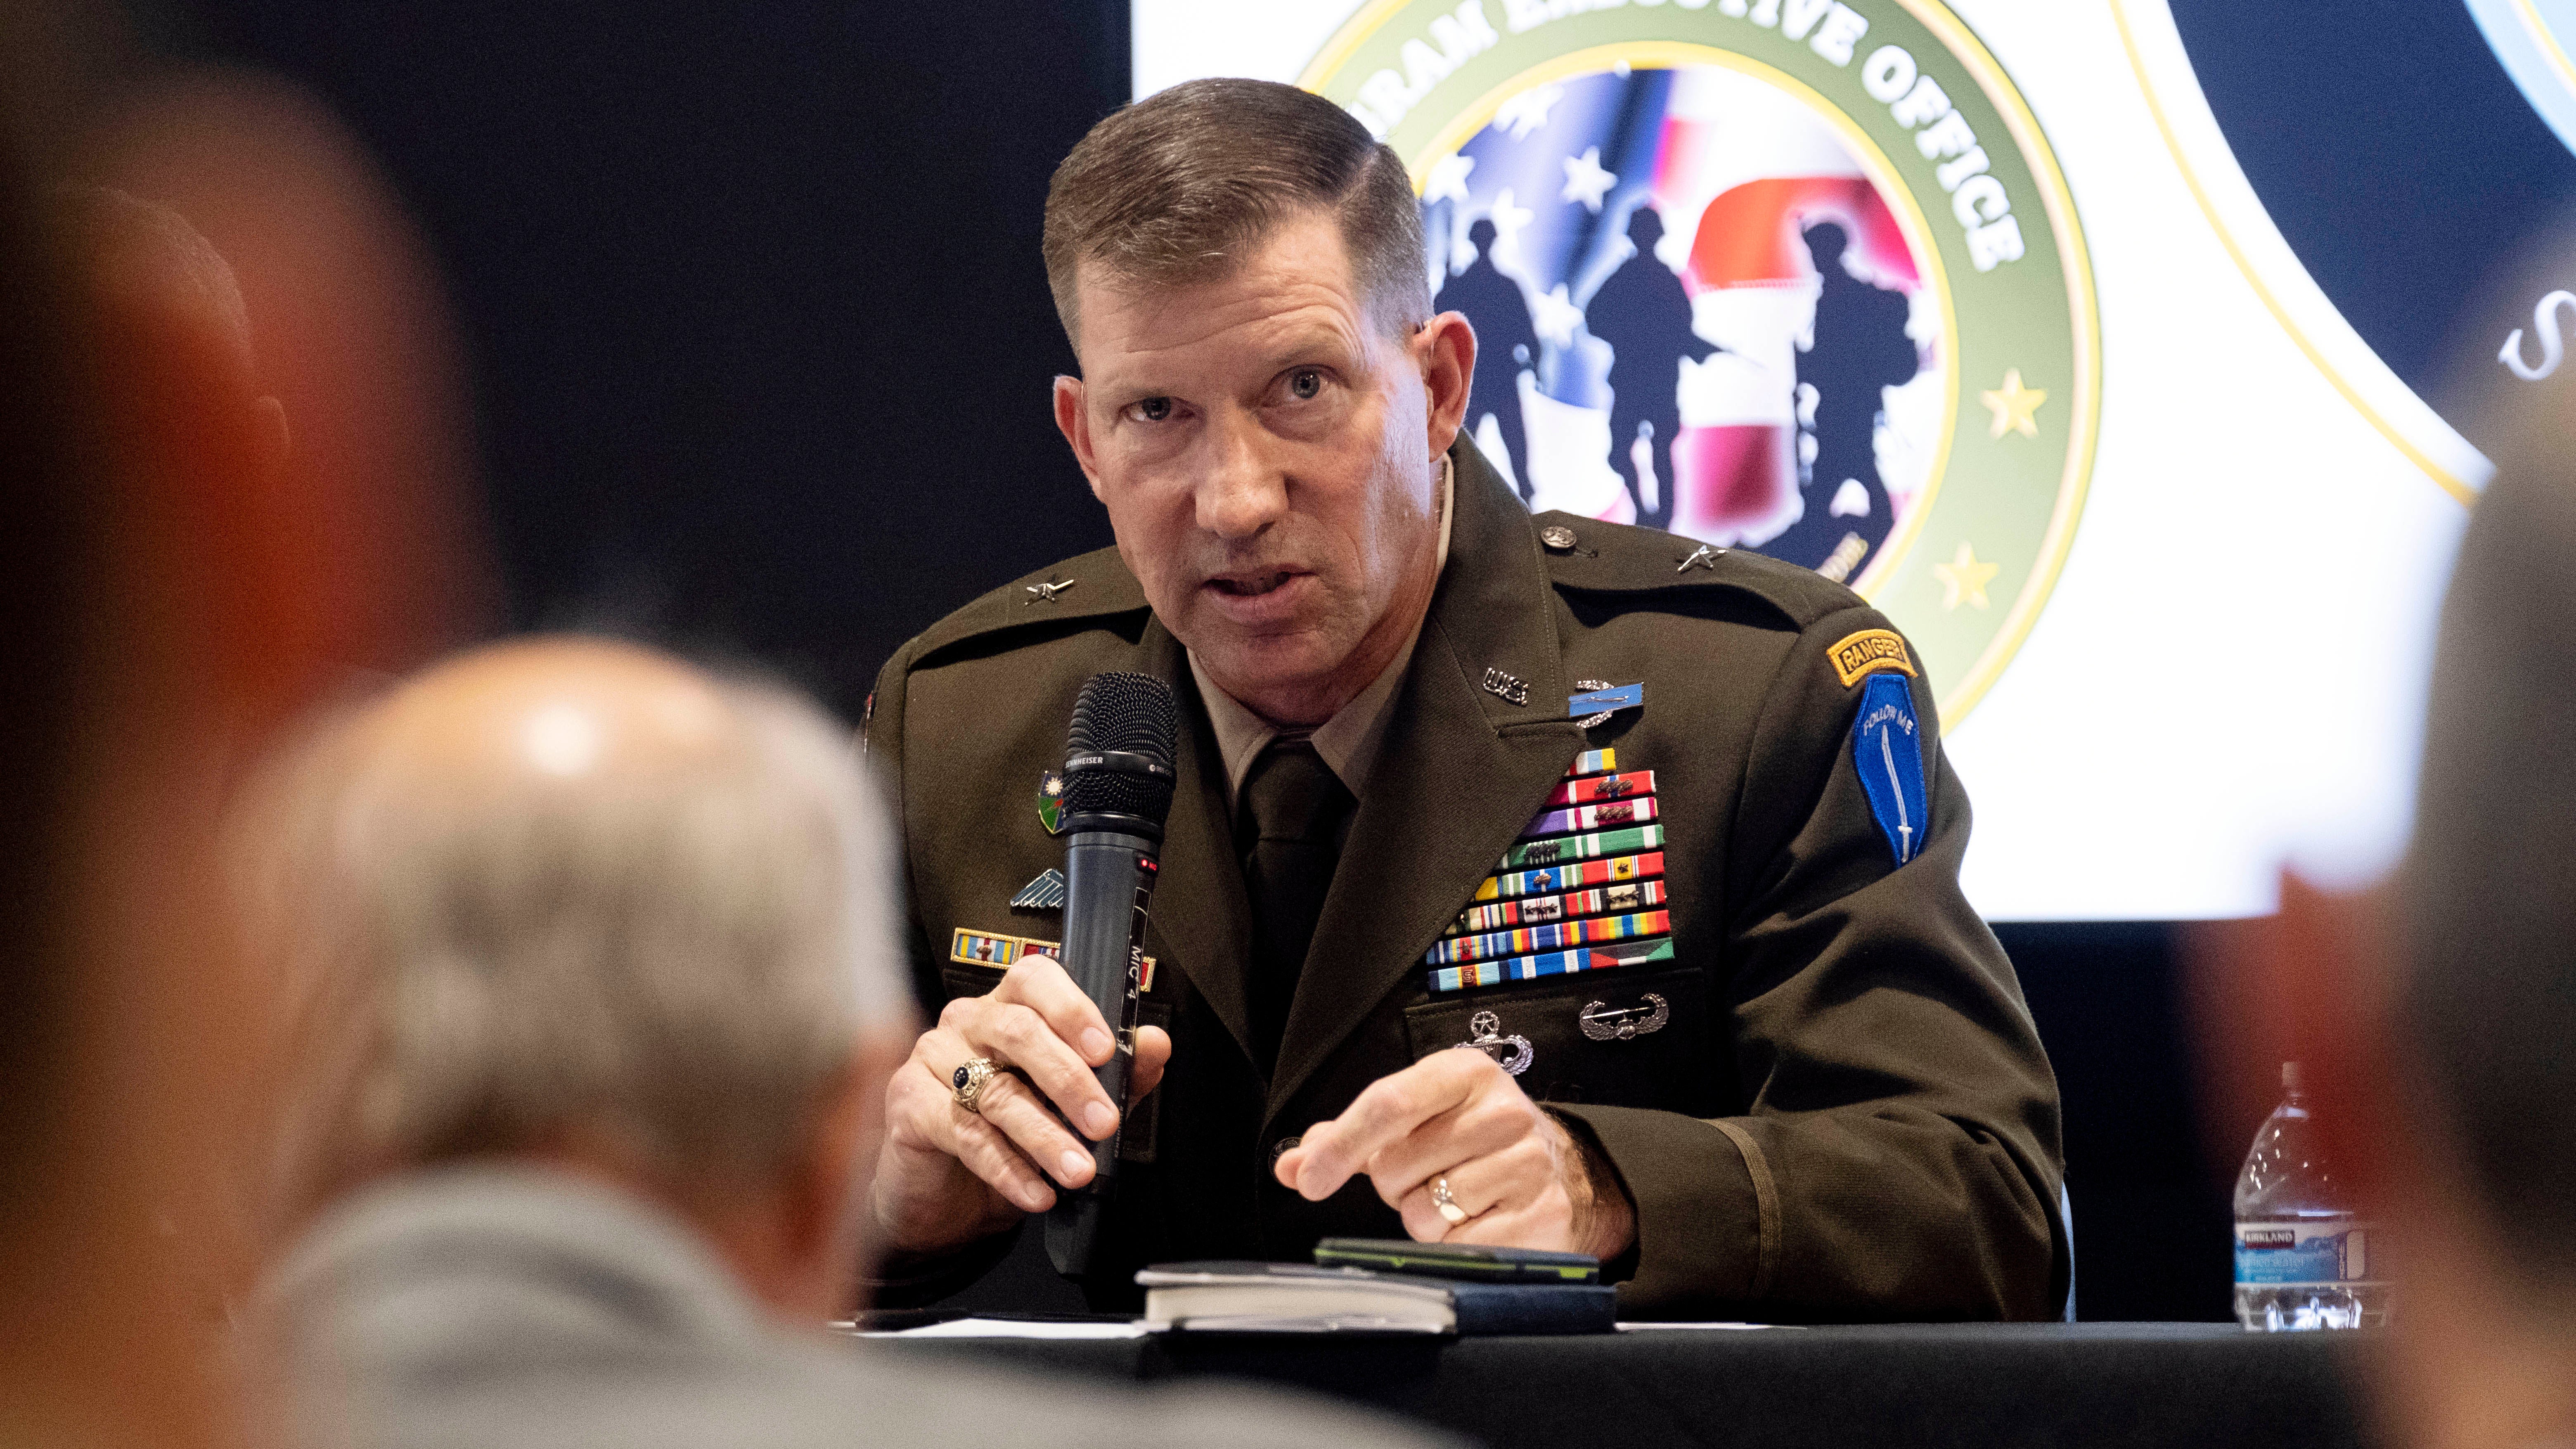 BG David Hodne answers a question during a presentation on Soldier Lethality at the 2019 AUSA Annual Meeting and Exposition at the Washington Convention Center on Oct. 15, 2019.